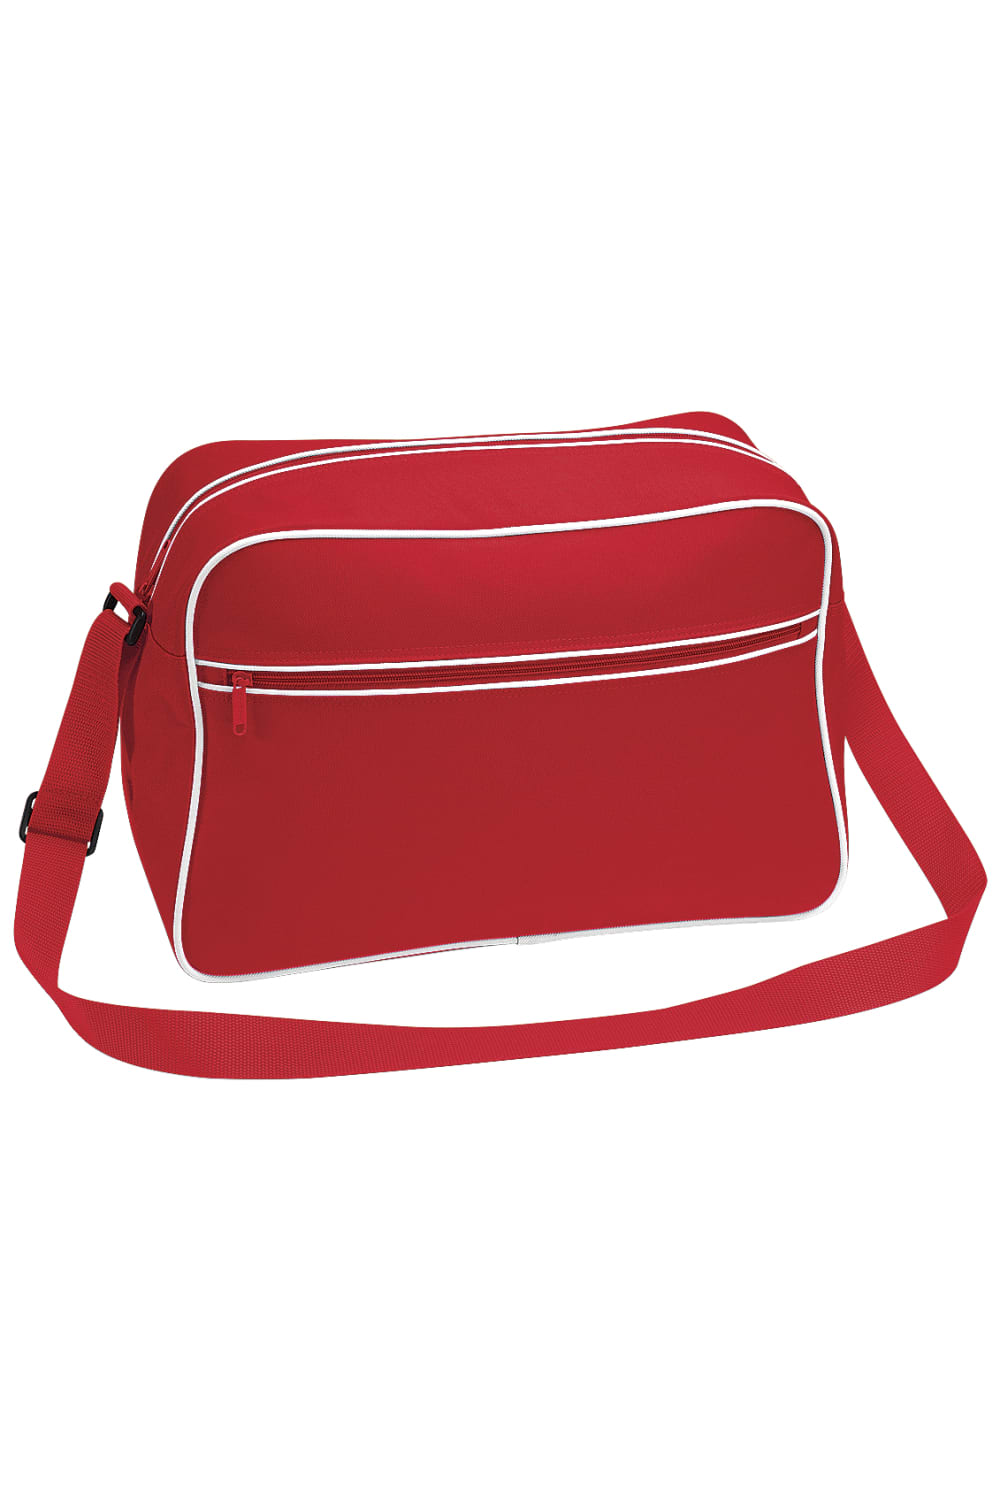 Retro Adjustable Shoulder Bag 18 Liters Pack Of 2 - Classic Red/White